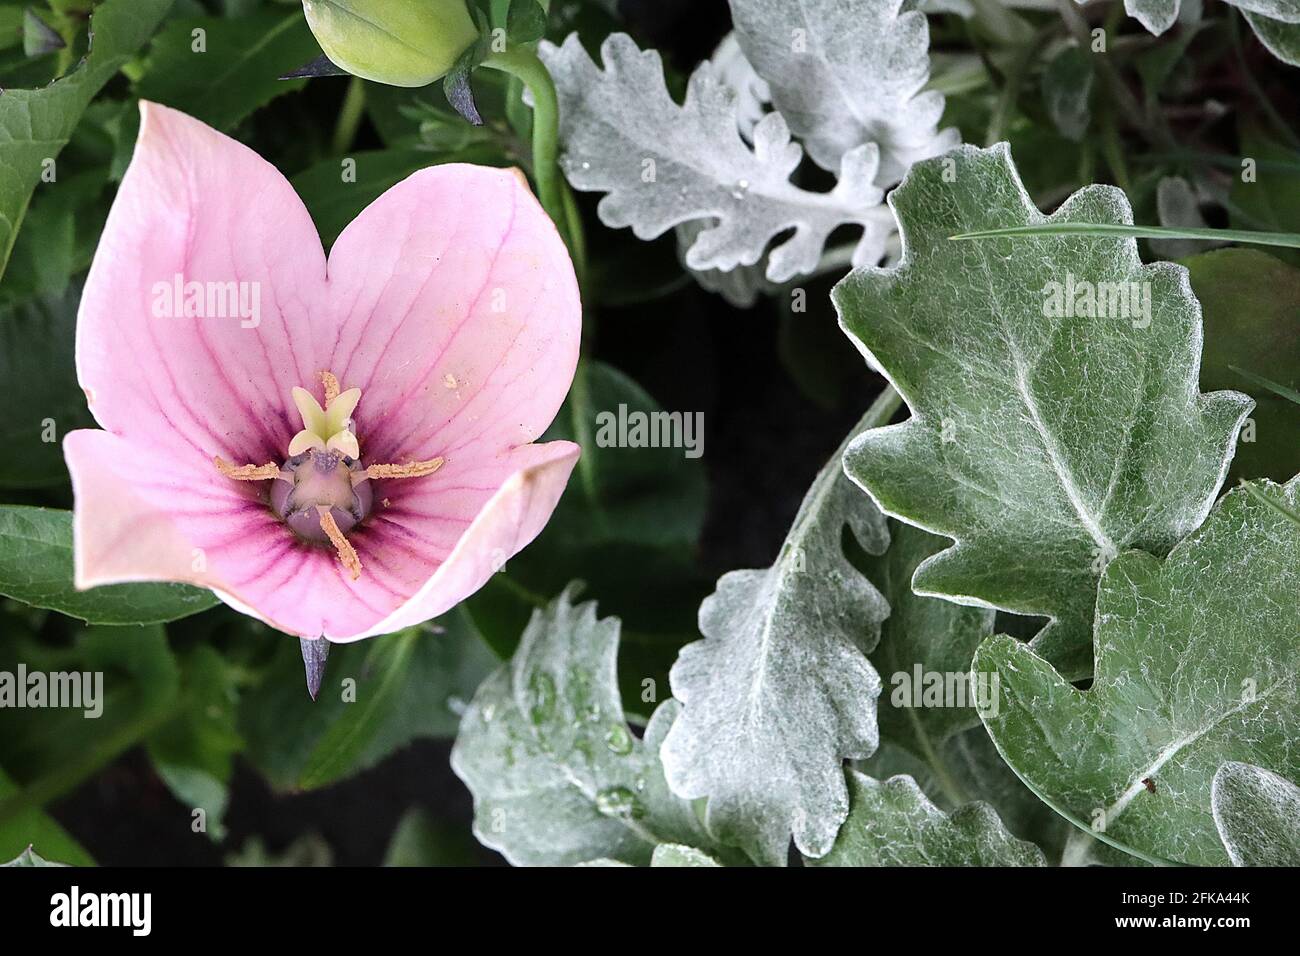 Platycodon grandiflorus ‘Astra Pink’ Chinese Balloon flower Astra Pink – pastel rose cloches fleurs avec des nervures roses foncé, avril, Angleterre, Royaume-Uni Banque D'Images